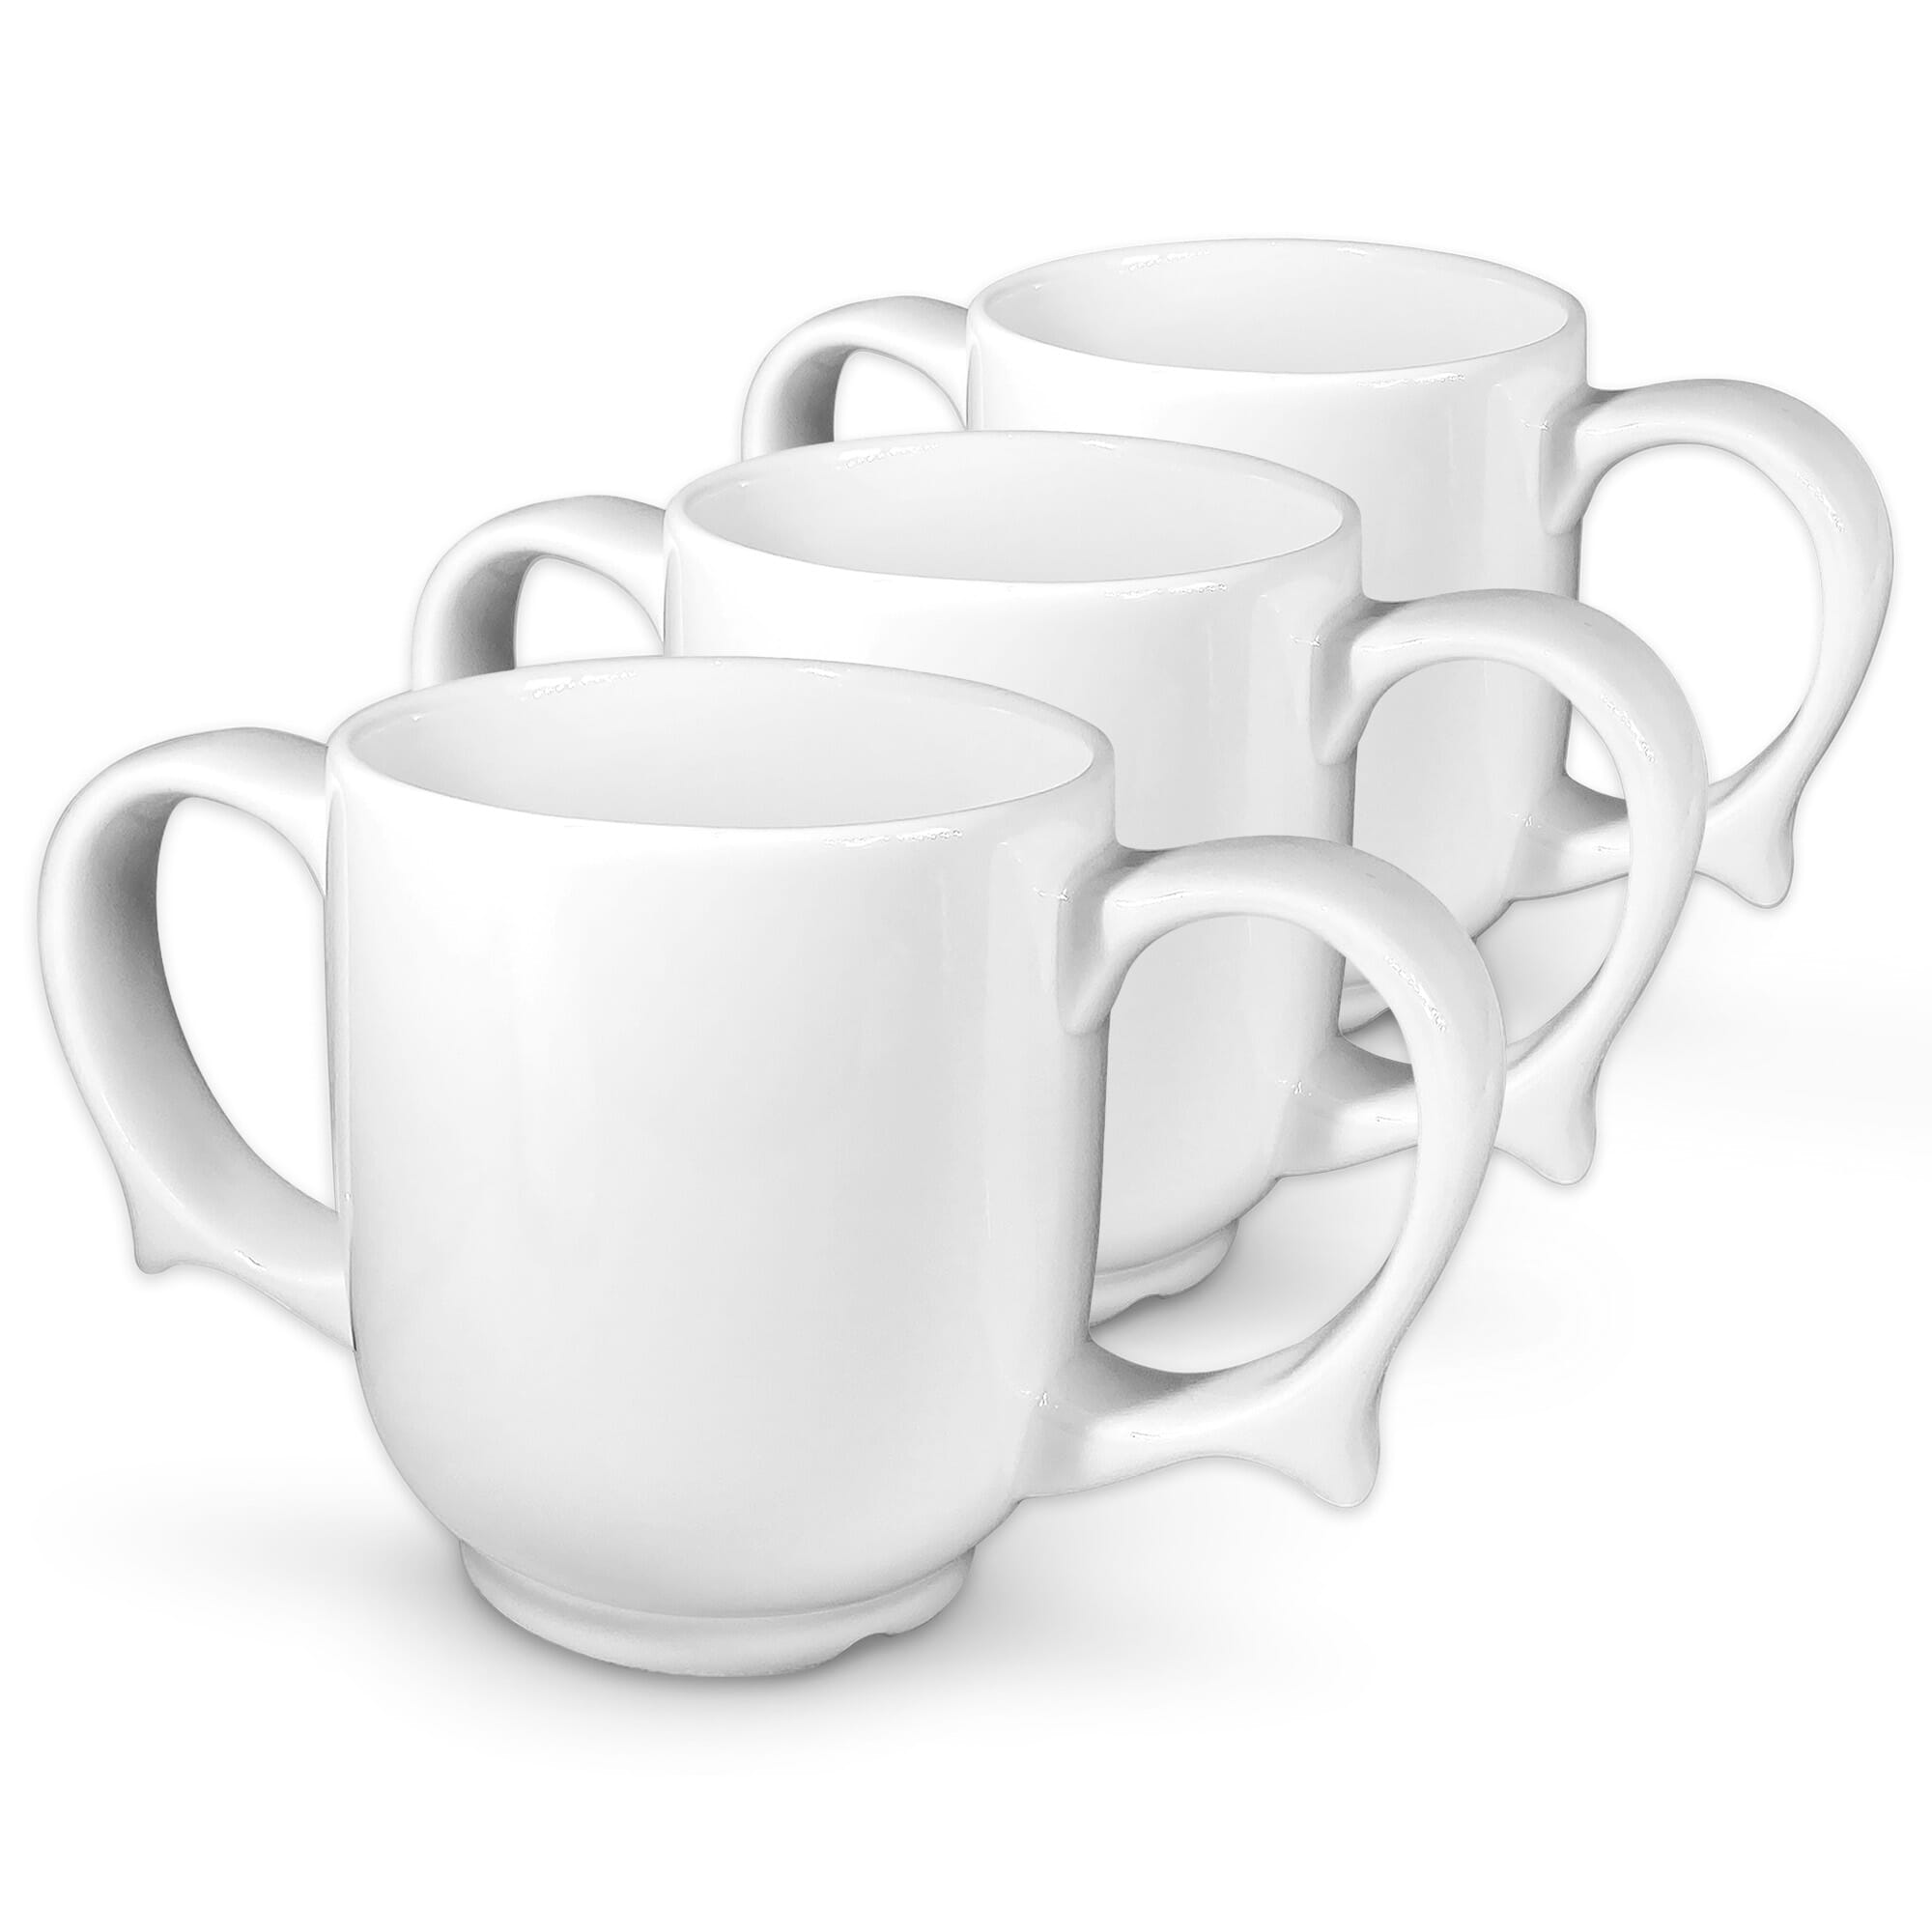 View Dignity Two Handled Mug White Pack of 3 information